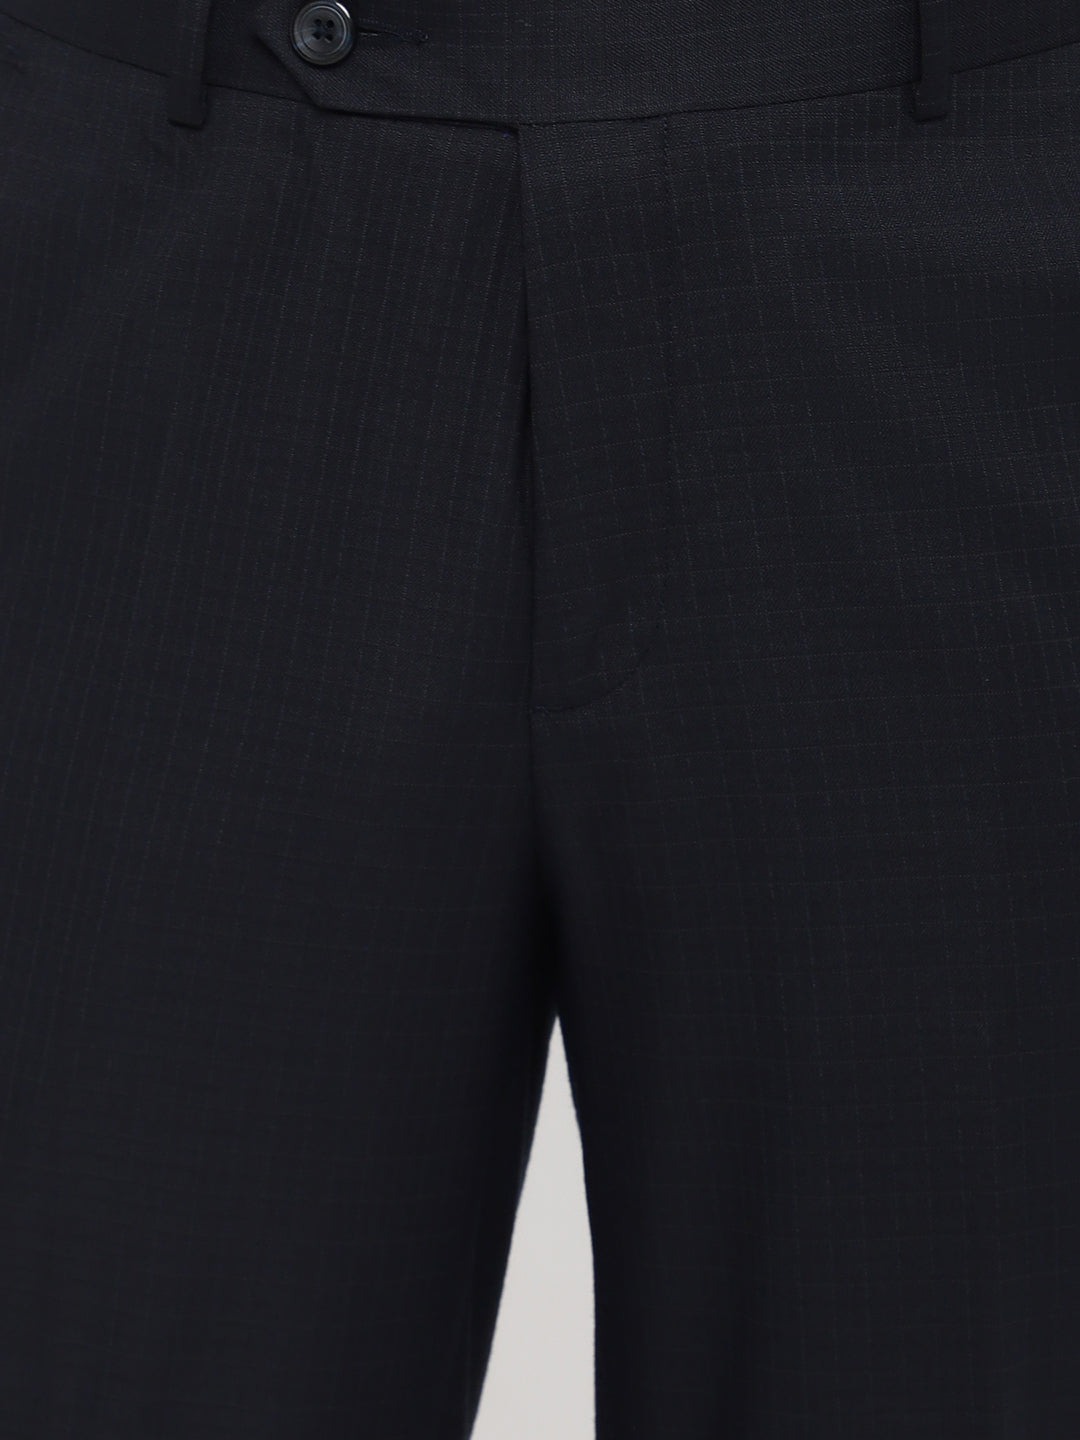 SOLID NAVY BLUE FORMAL TROUSER